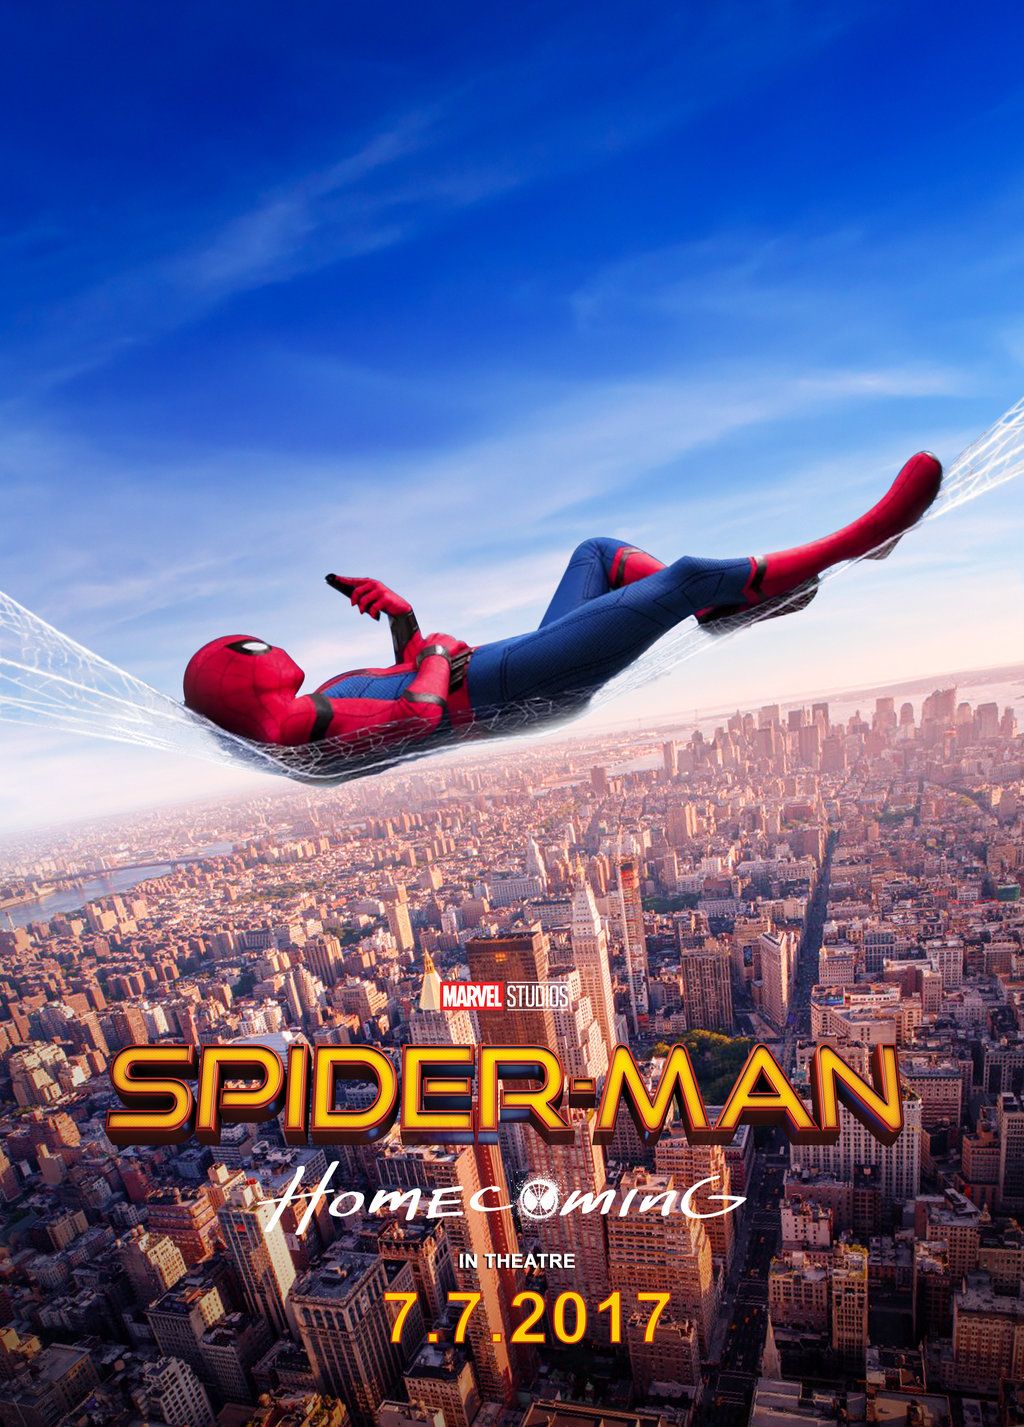 Spider Man Homecoming Iphone Wallpapers